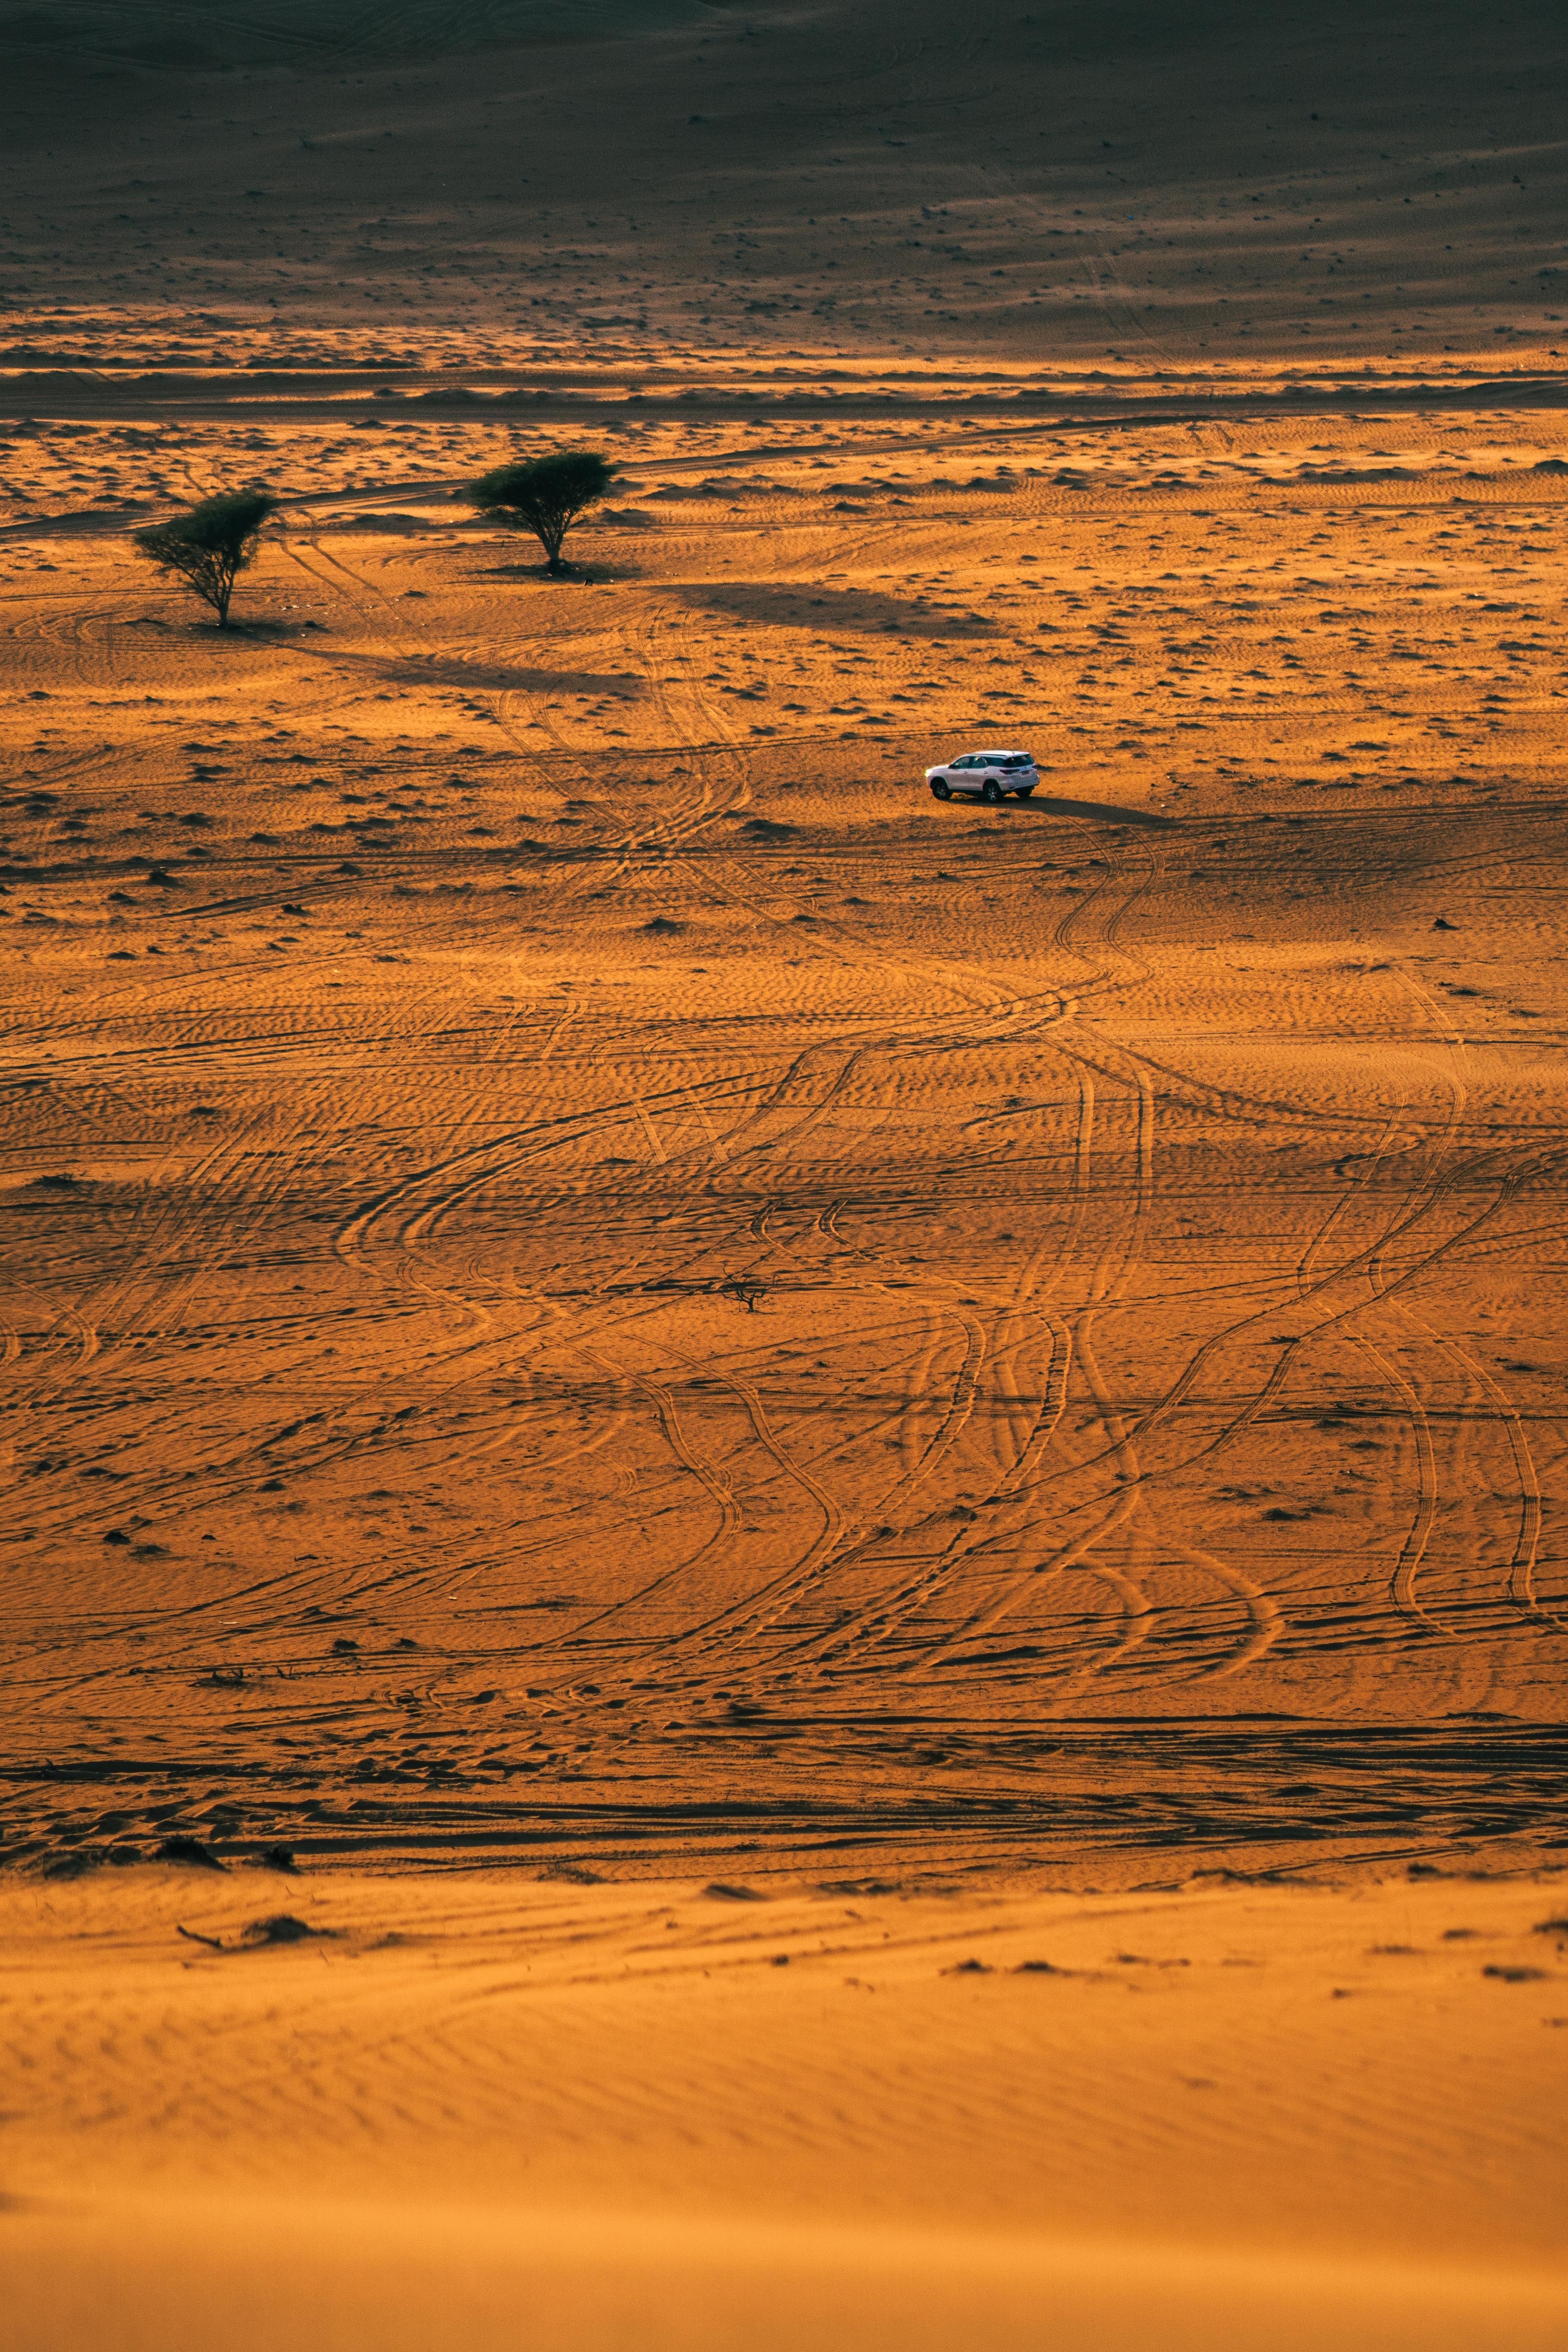 desert, nature, sand, cars, view from above, car, machine